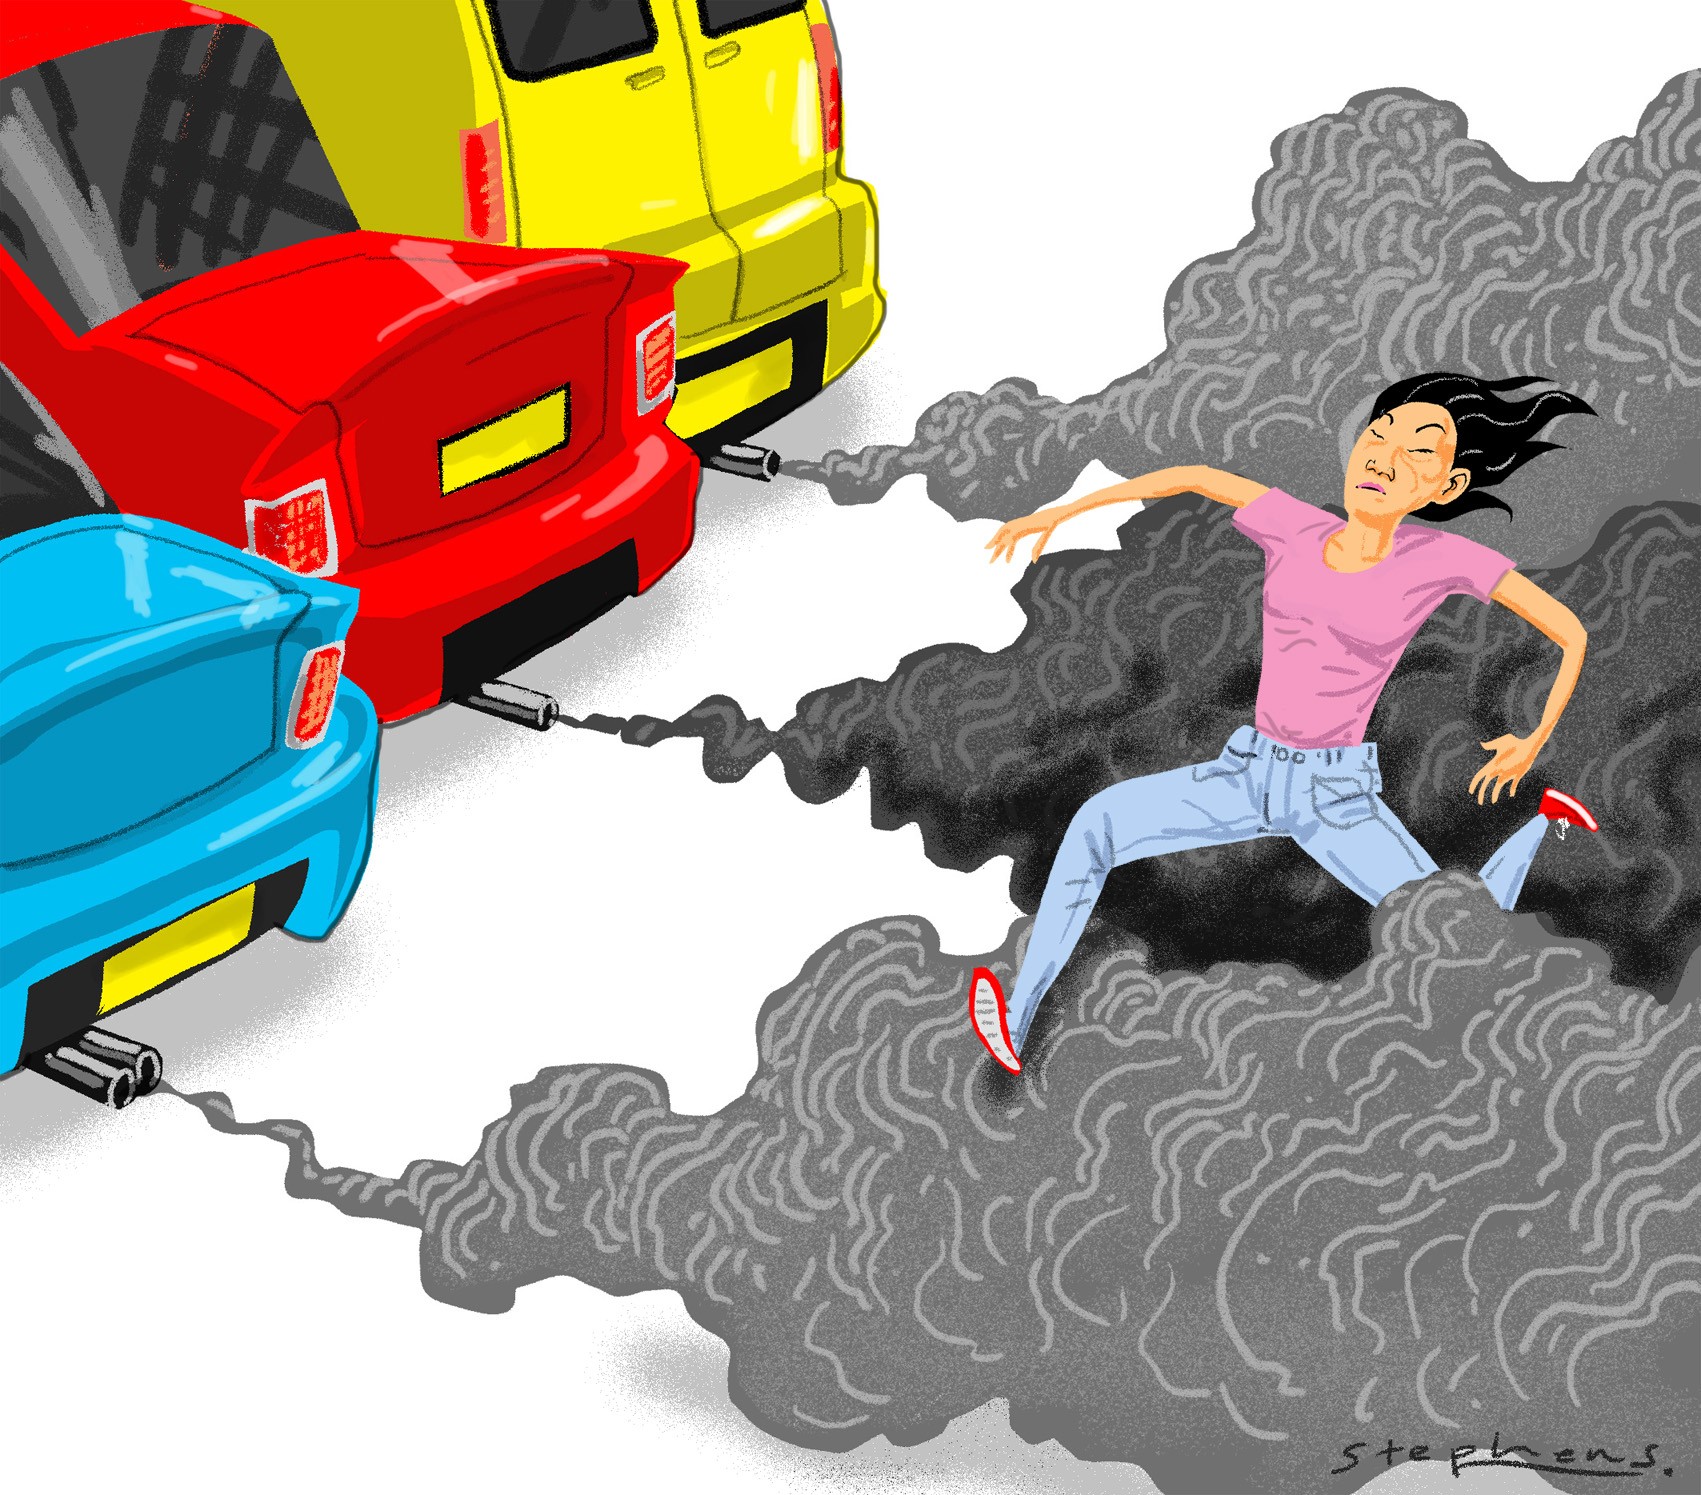 Pedestrians in Hong Kong are often forced to walk on the road. This is not only unsafe but increases proximity to exhaust emissions while contributing to impaired traffic flow, which in turn increases emissions. Illustration: Craig Stephens